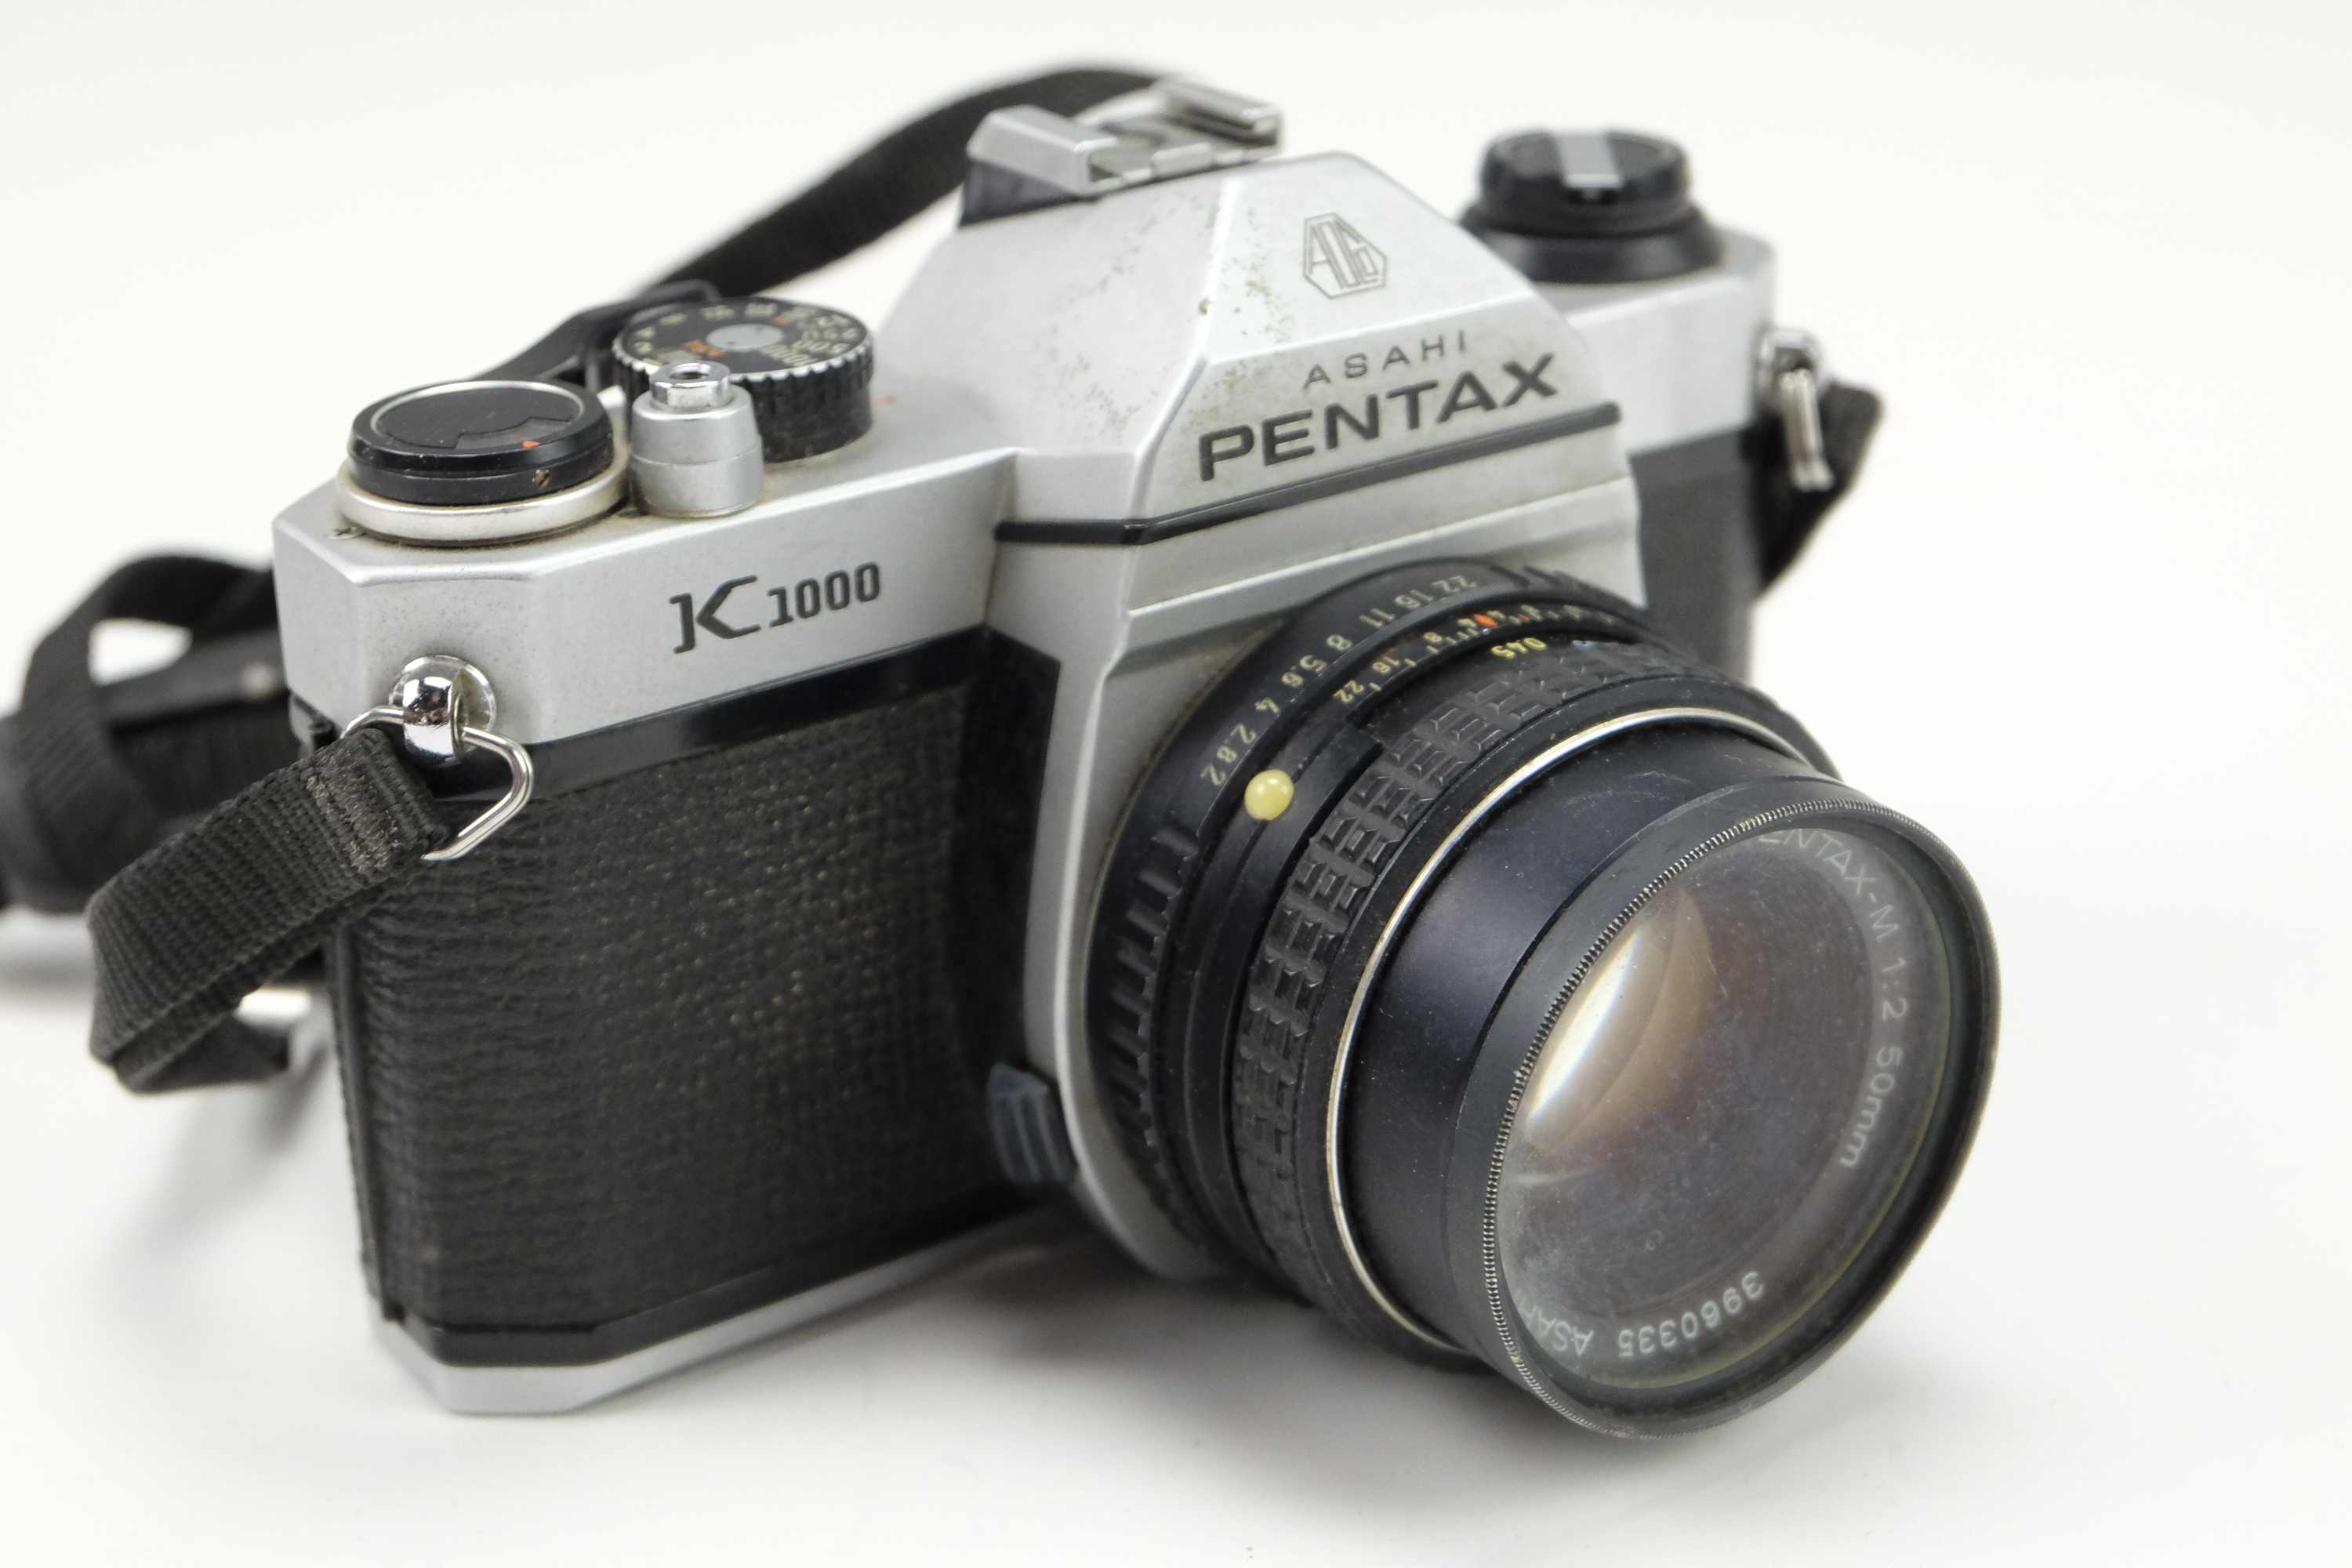 A Pentax K1000 film camera body together with a Pentax MEsuper, two Asahi Optical Co. lenses, a - Image 6 of 7